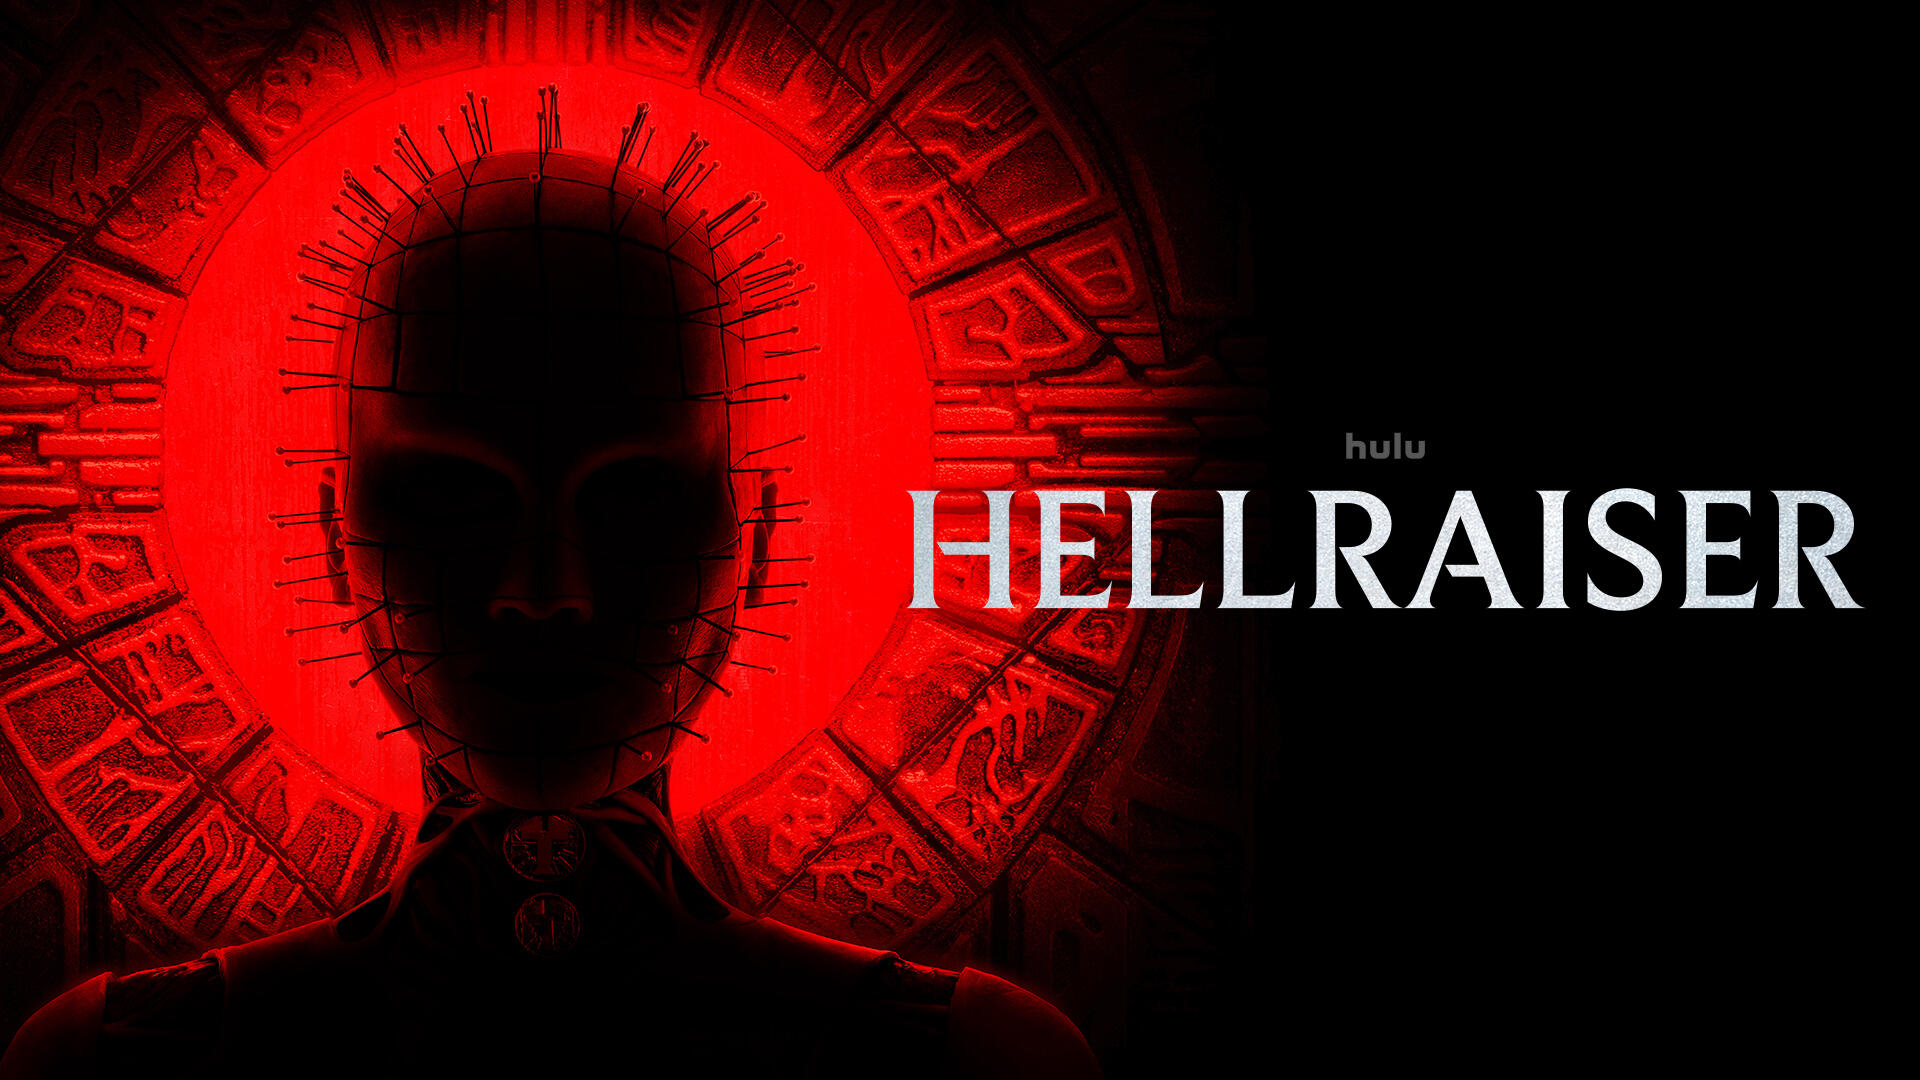 Hellraiser -- A reimagining of Clive Barker’s 1987 horror classic in which a young woman struggling with addiction comes into possession of an ancient puzzle box, unaware that its purpose is to summon the Cenobites, a group of sadistic supernatural beings from another dimension. (Courtesy of Spyglass Media Group)